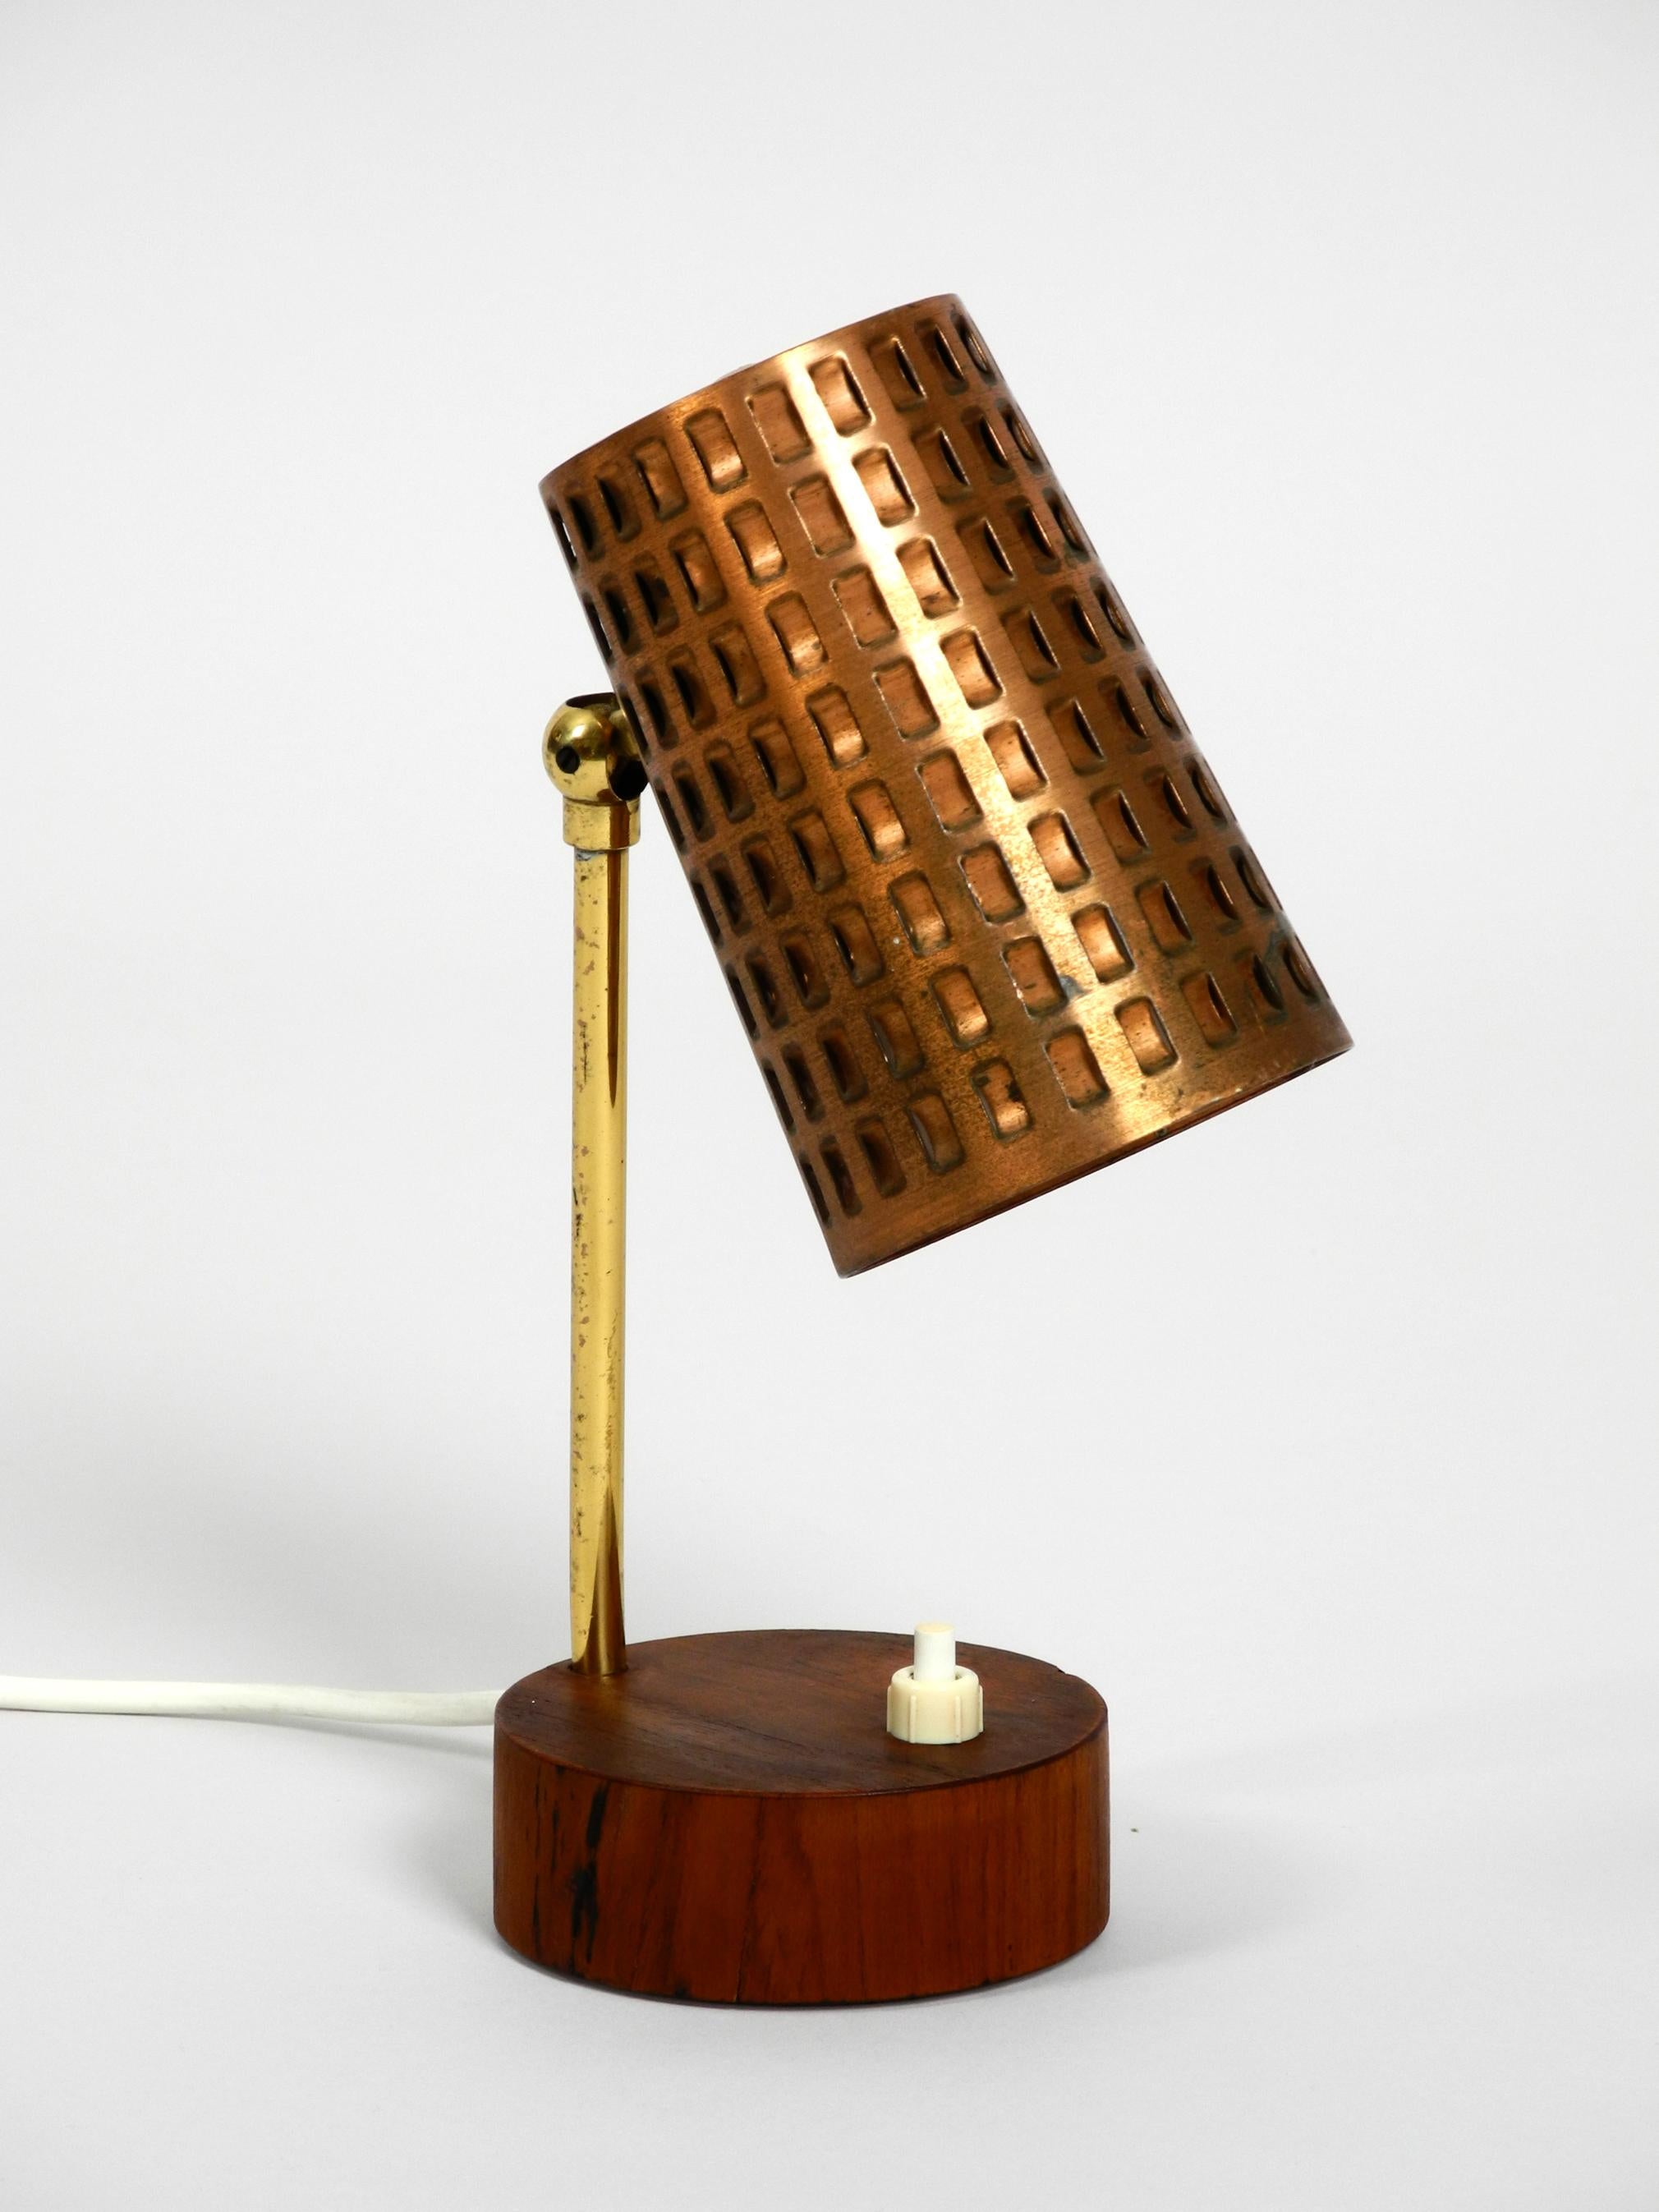 Beautiful Midcentury Table Lamp with Perforated Copper Shade and Teak Wood Base 4